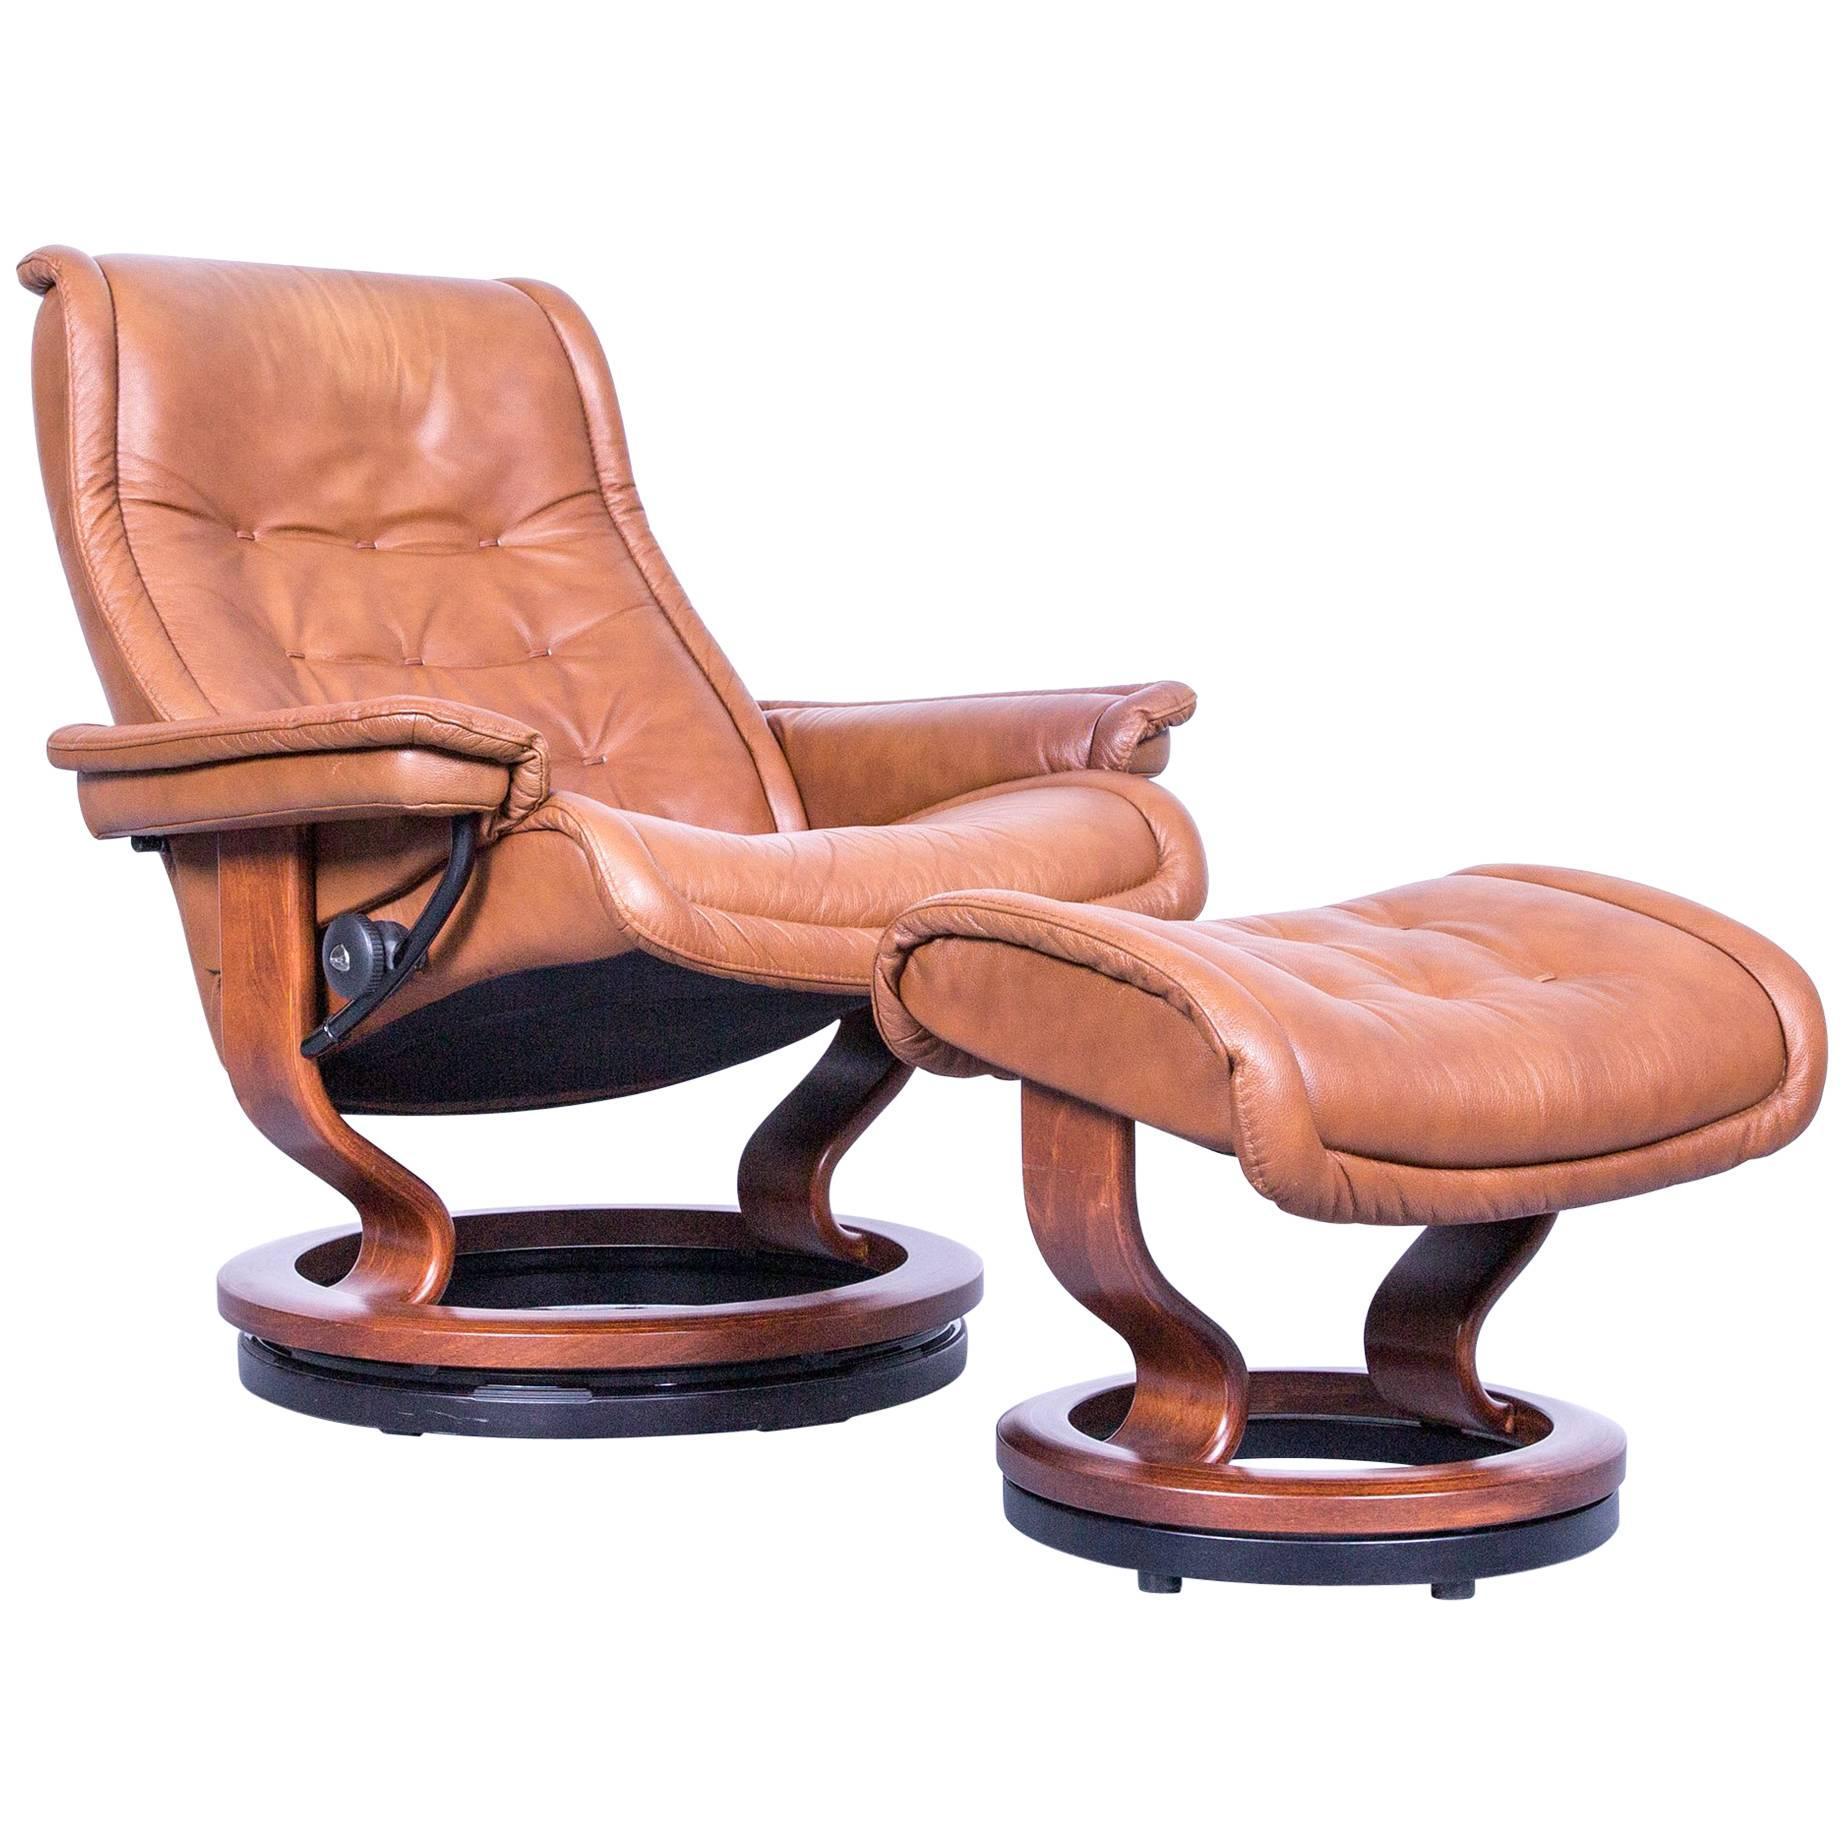 Stressless Royal Leather Recliner Chair and Ottoman by Ekornes